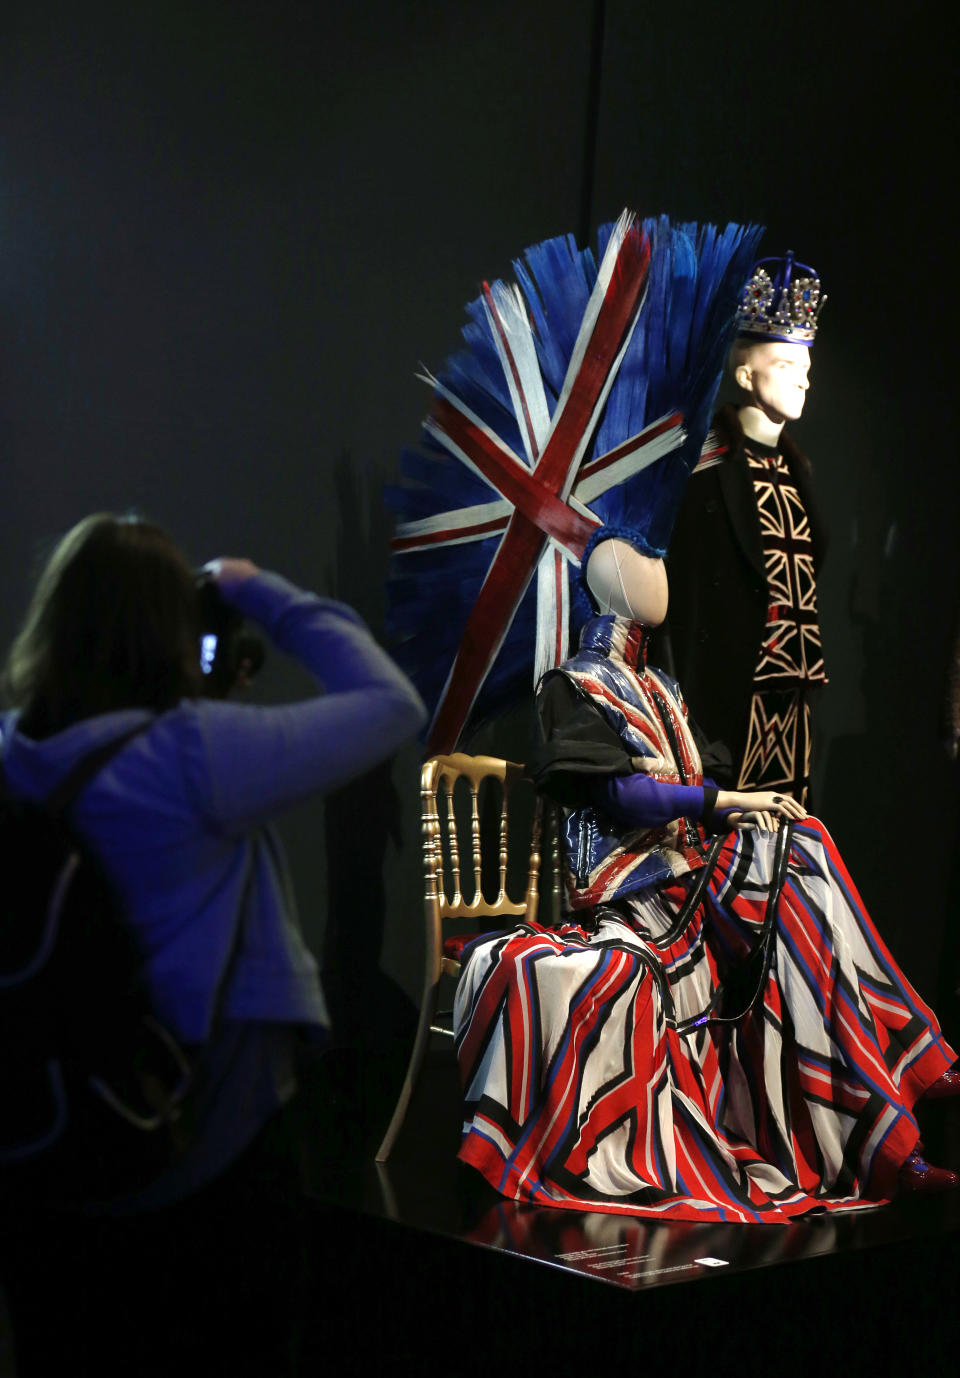 A visitor takes picture of a creation of French couturier Jean Paul Gaultier during the launch of his exhibition 'The Fashion World of Jean Paul Gaultier : From the Sidewalk to the Catwalk' at the Barbican Art Gallery in London, Tuesday, April 8, 2014. (AP Photo/Sang Tan)